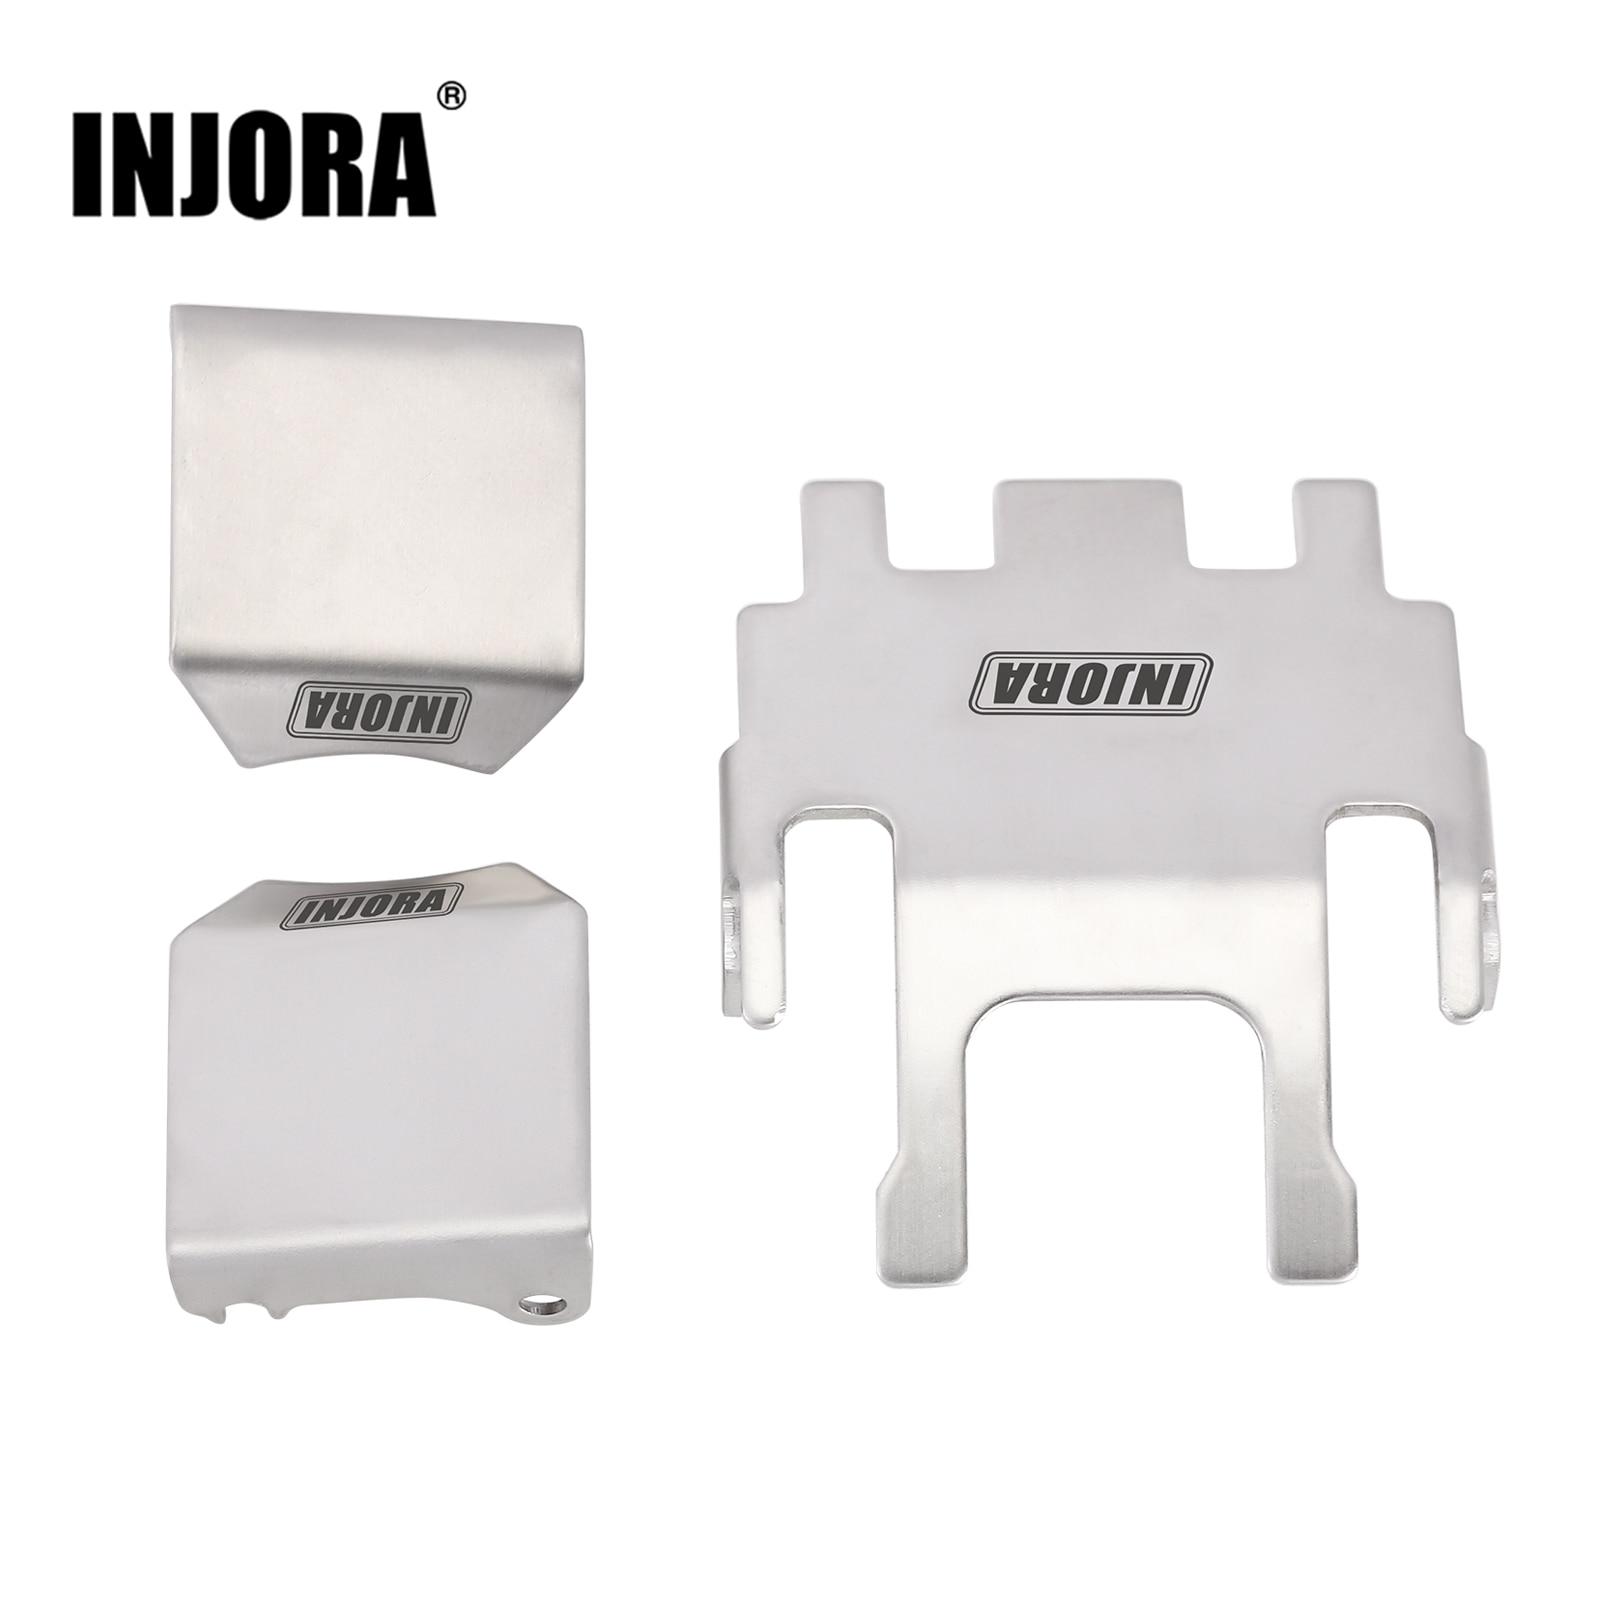 INJORA-Stainless-Steel-Chassis-Armor-Skid-Plate-Axle-Protector-for-1-18-RC-Crawler-TRX4M-Upgrade.jpg